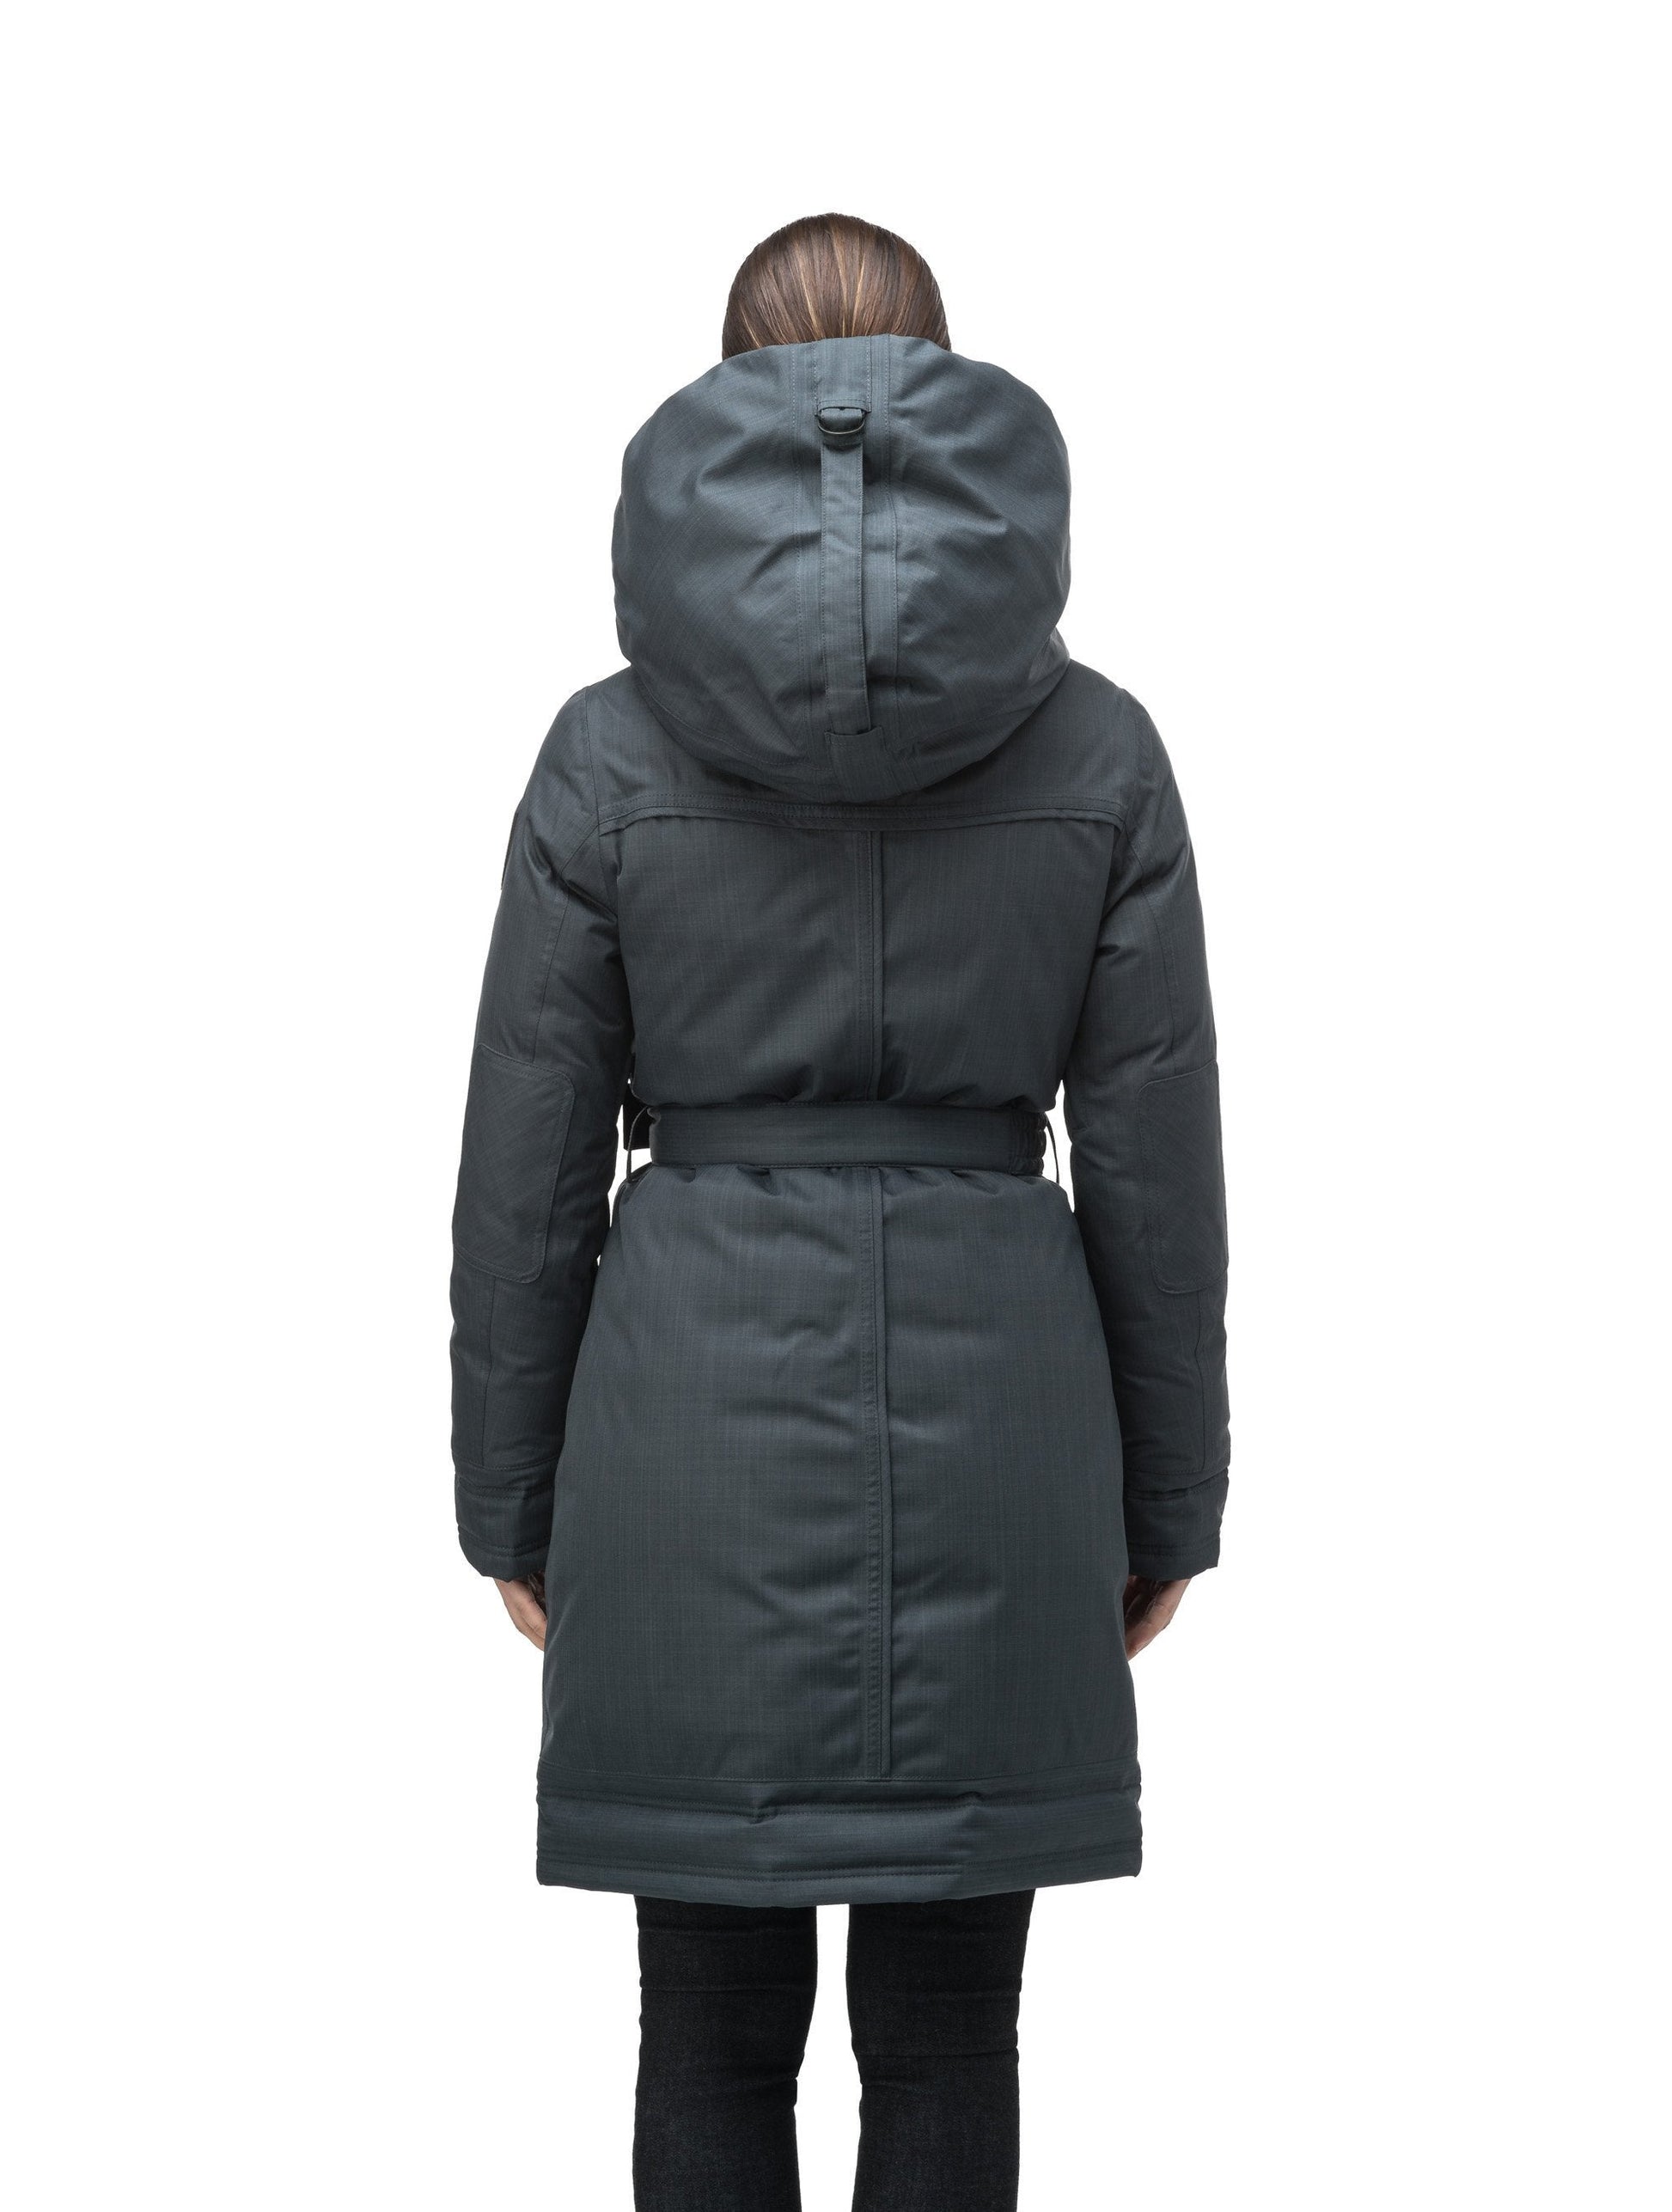 Women's Thigh length own parka with a furless oversized hood in CH Balsam